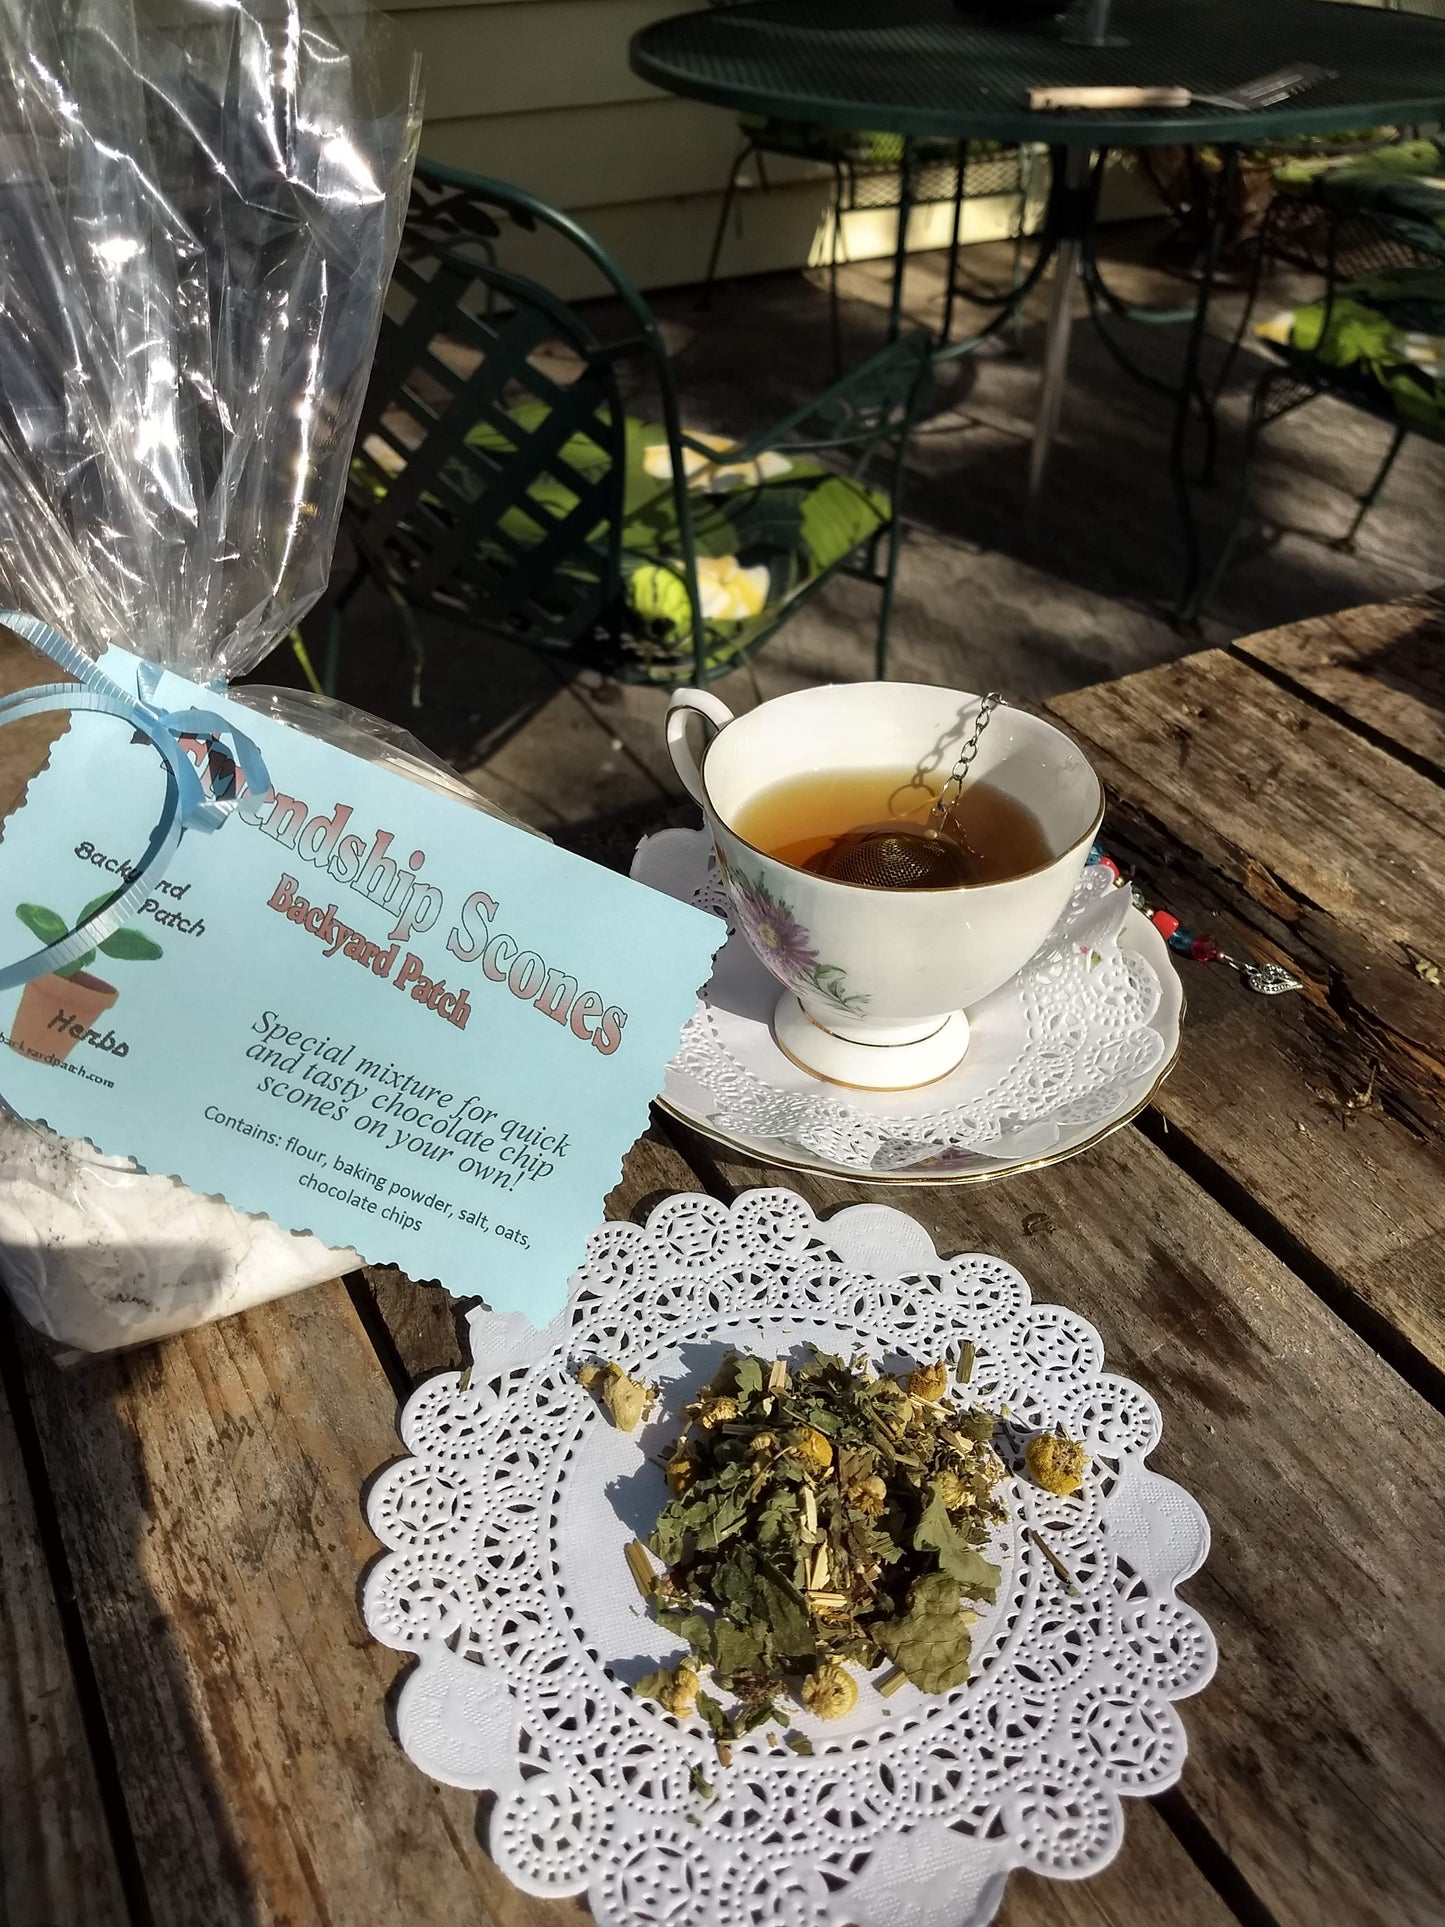 Scone and Tea Gift Package, Chocolate Chip Friendship Scone Dry Mix and Holiday Tulsi Herb Tea, gift set, gift basket